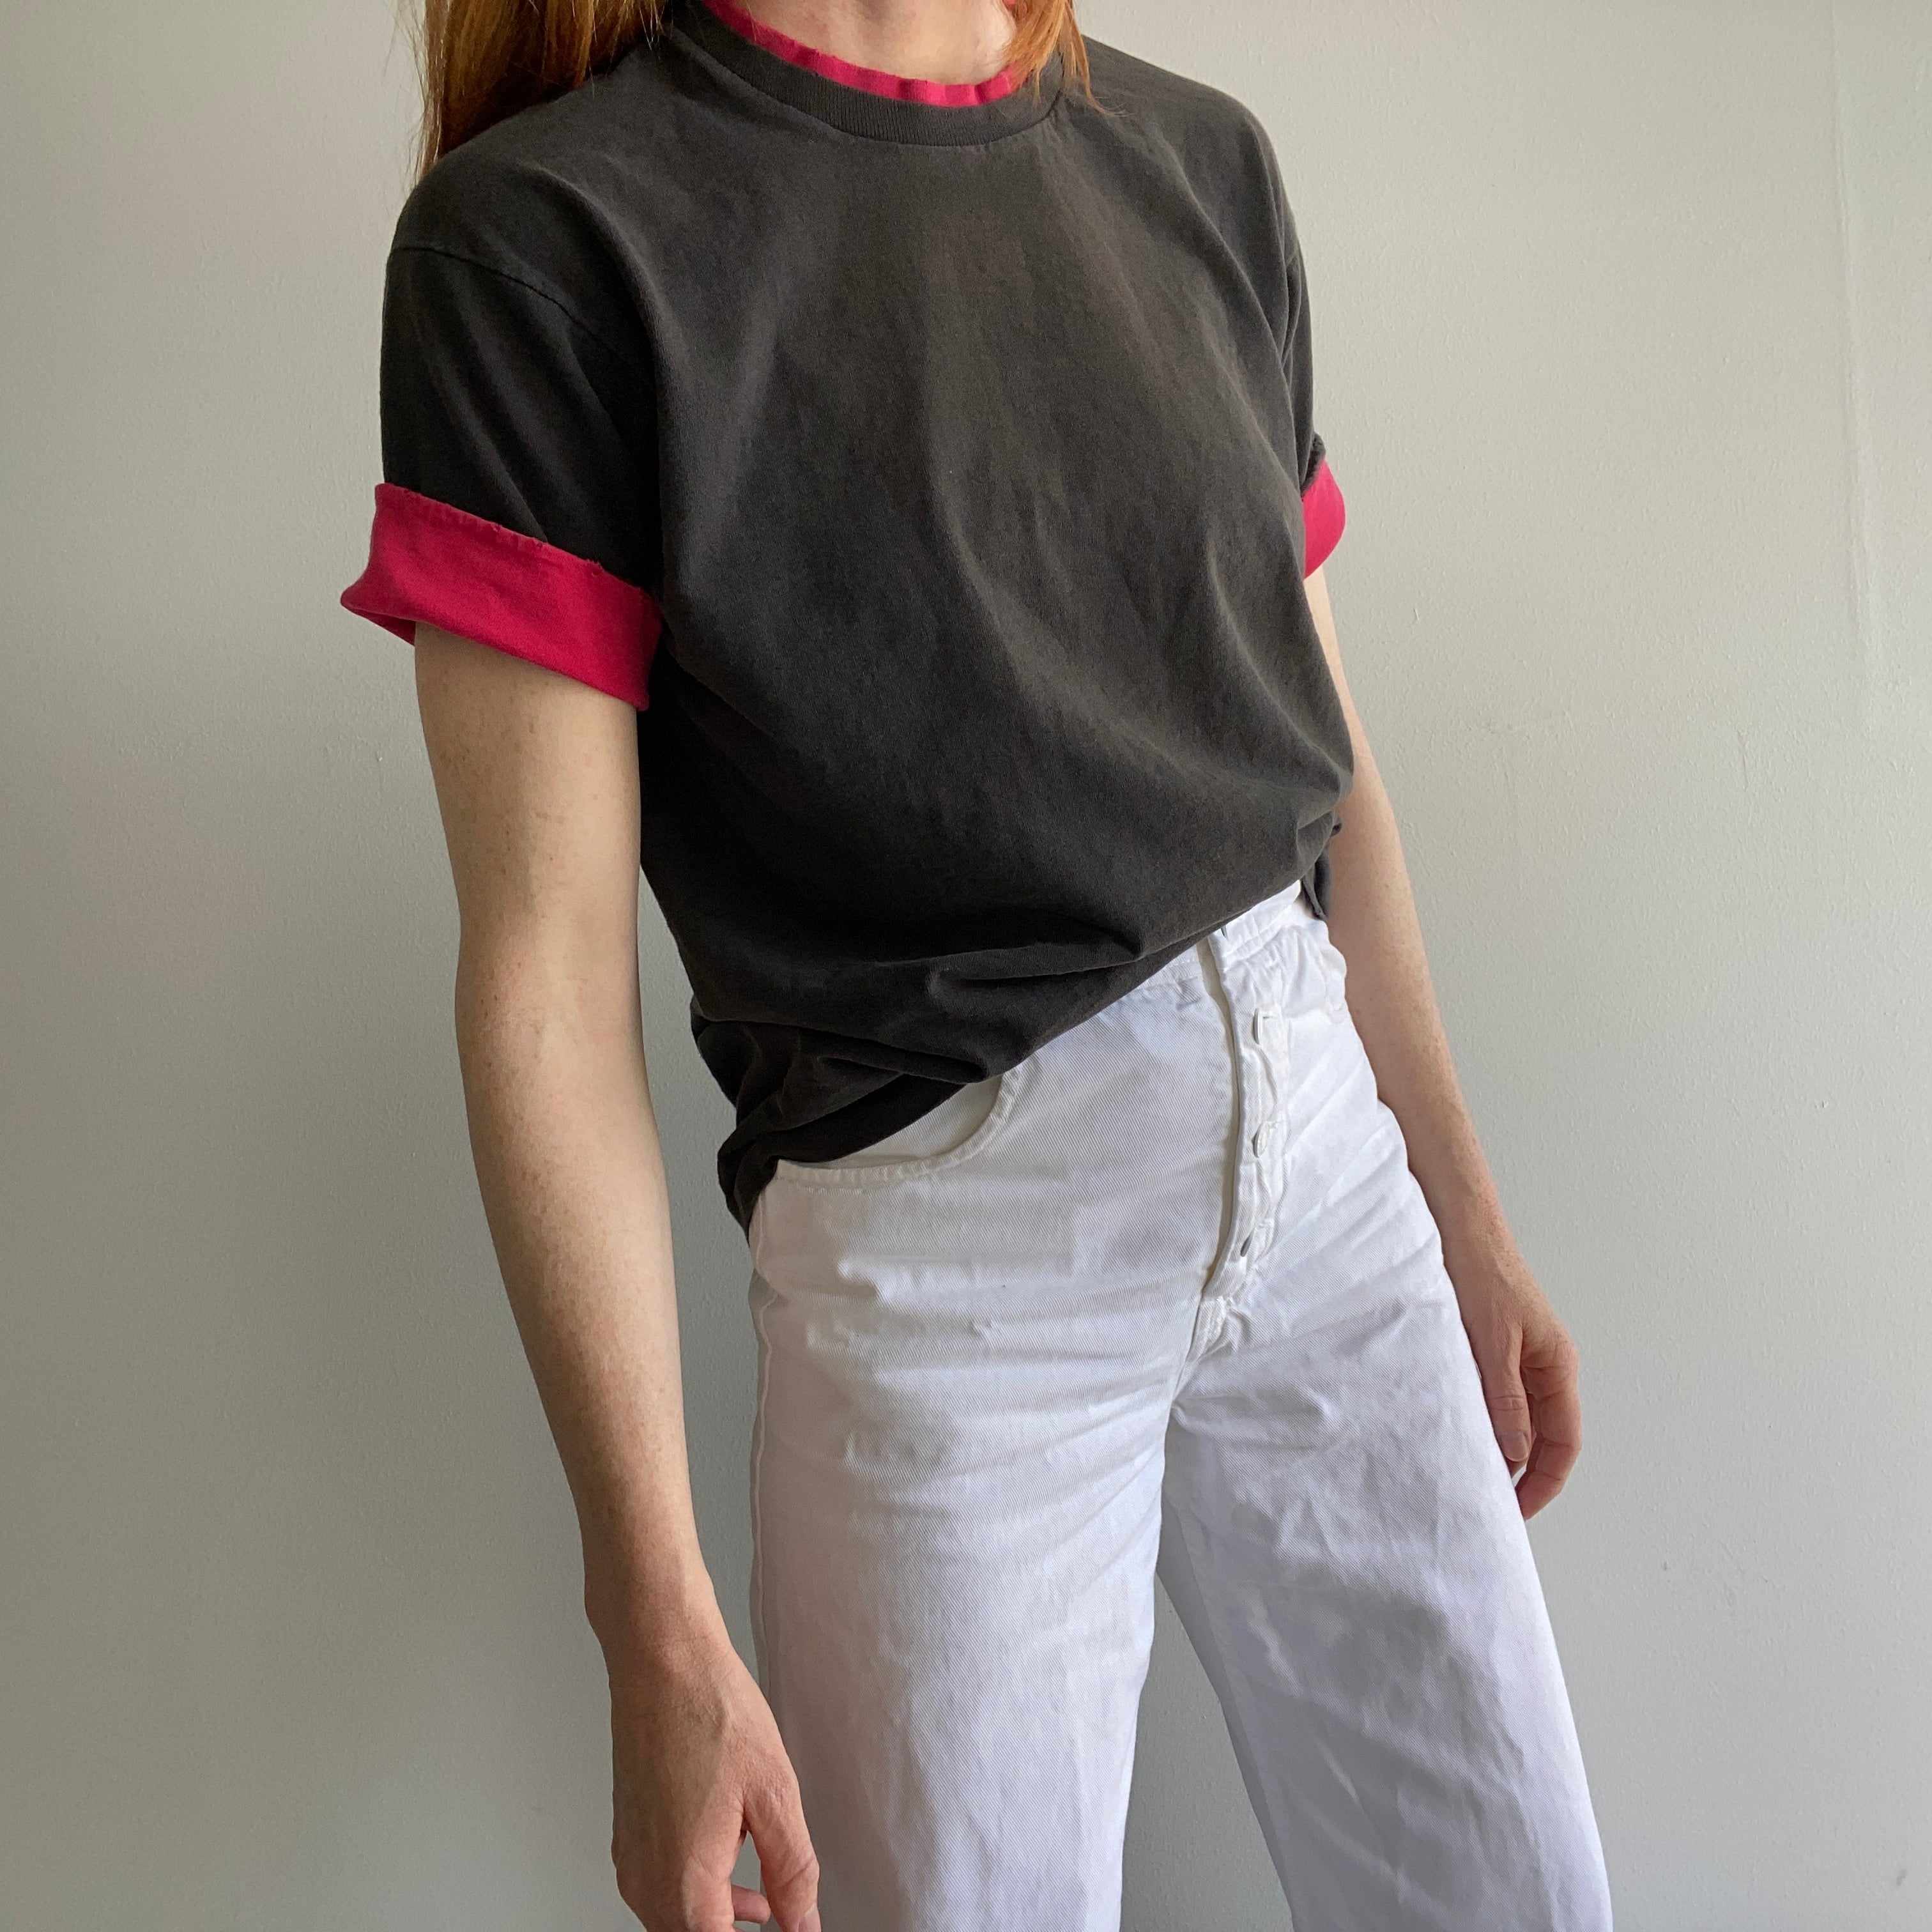 1980s FOTL Two Tone Cotton Black and Red T-Shirt